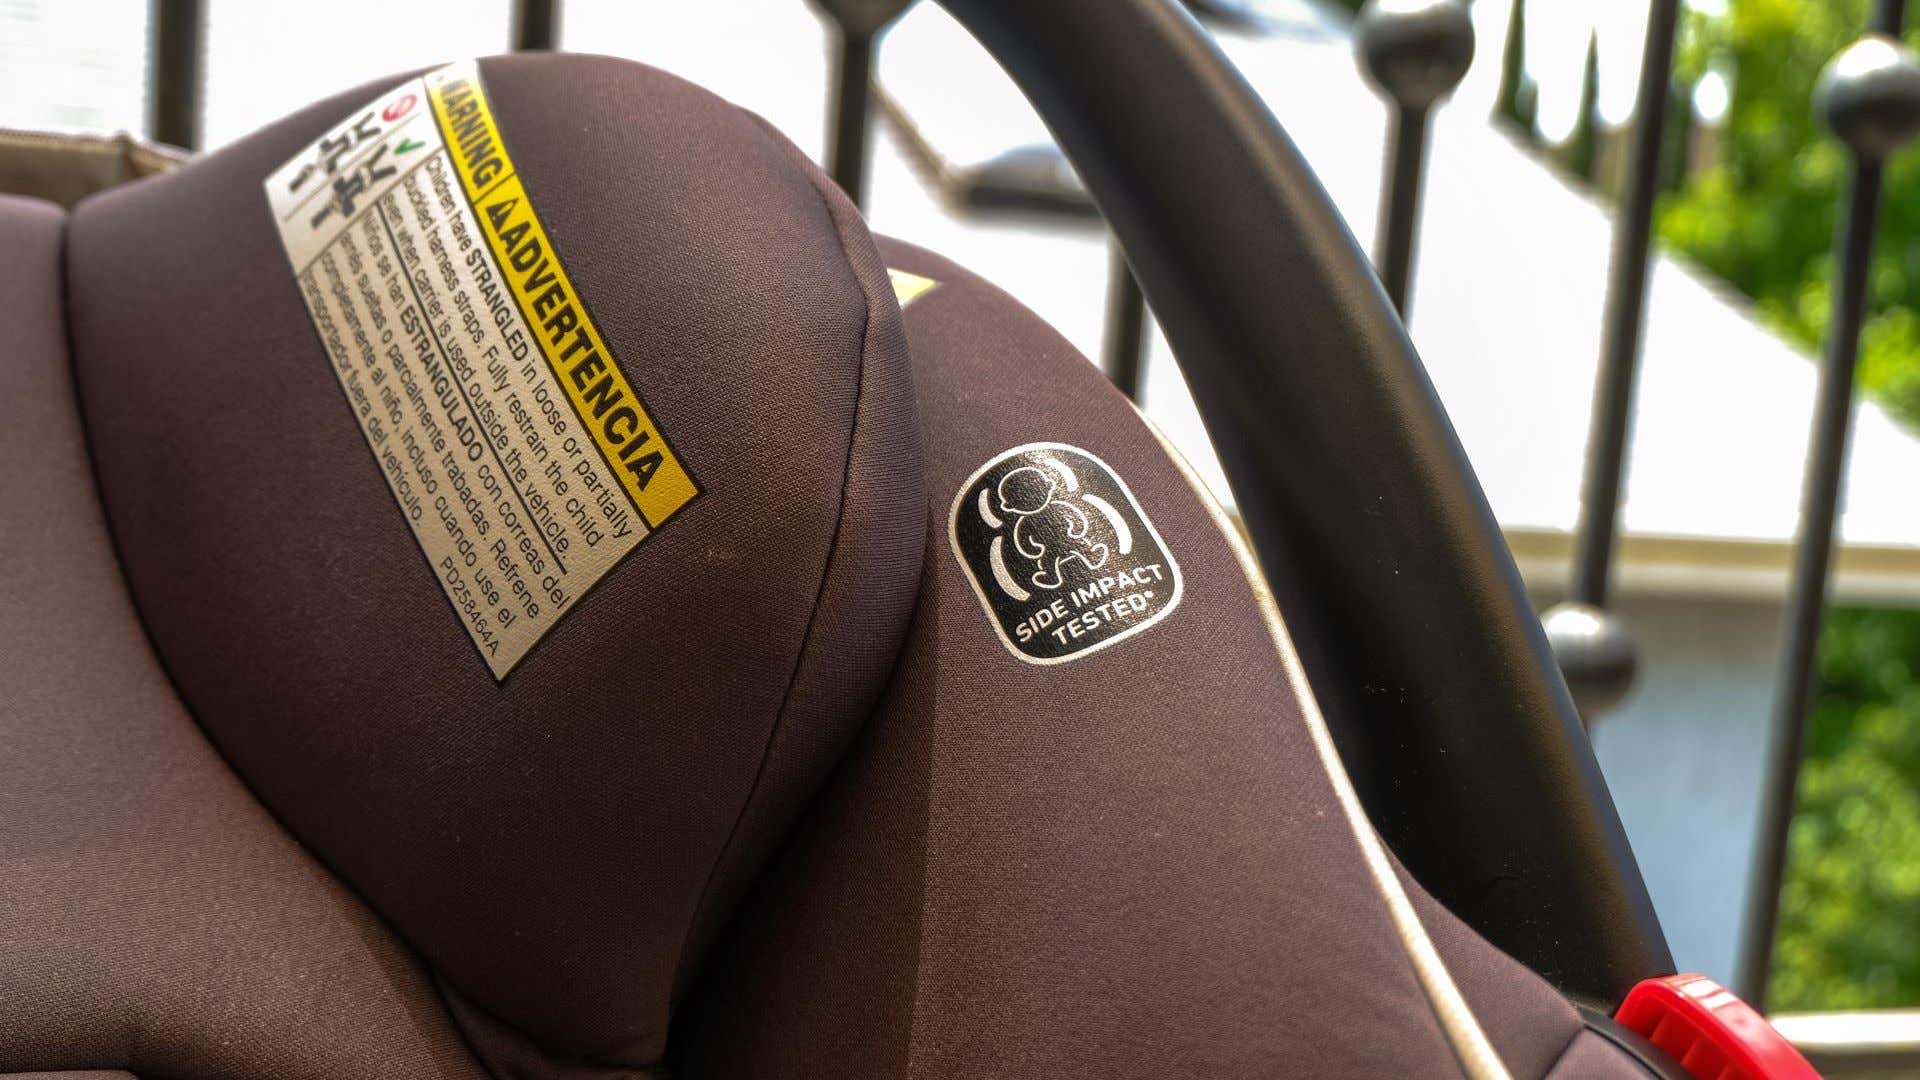 A car seat's side-impact certification label.